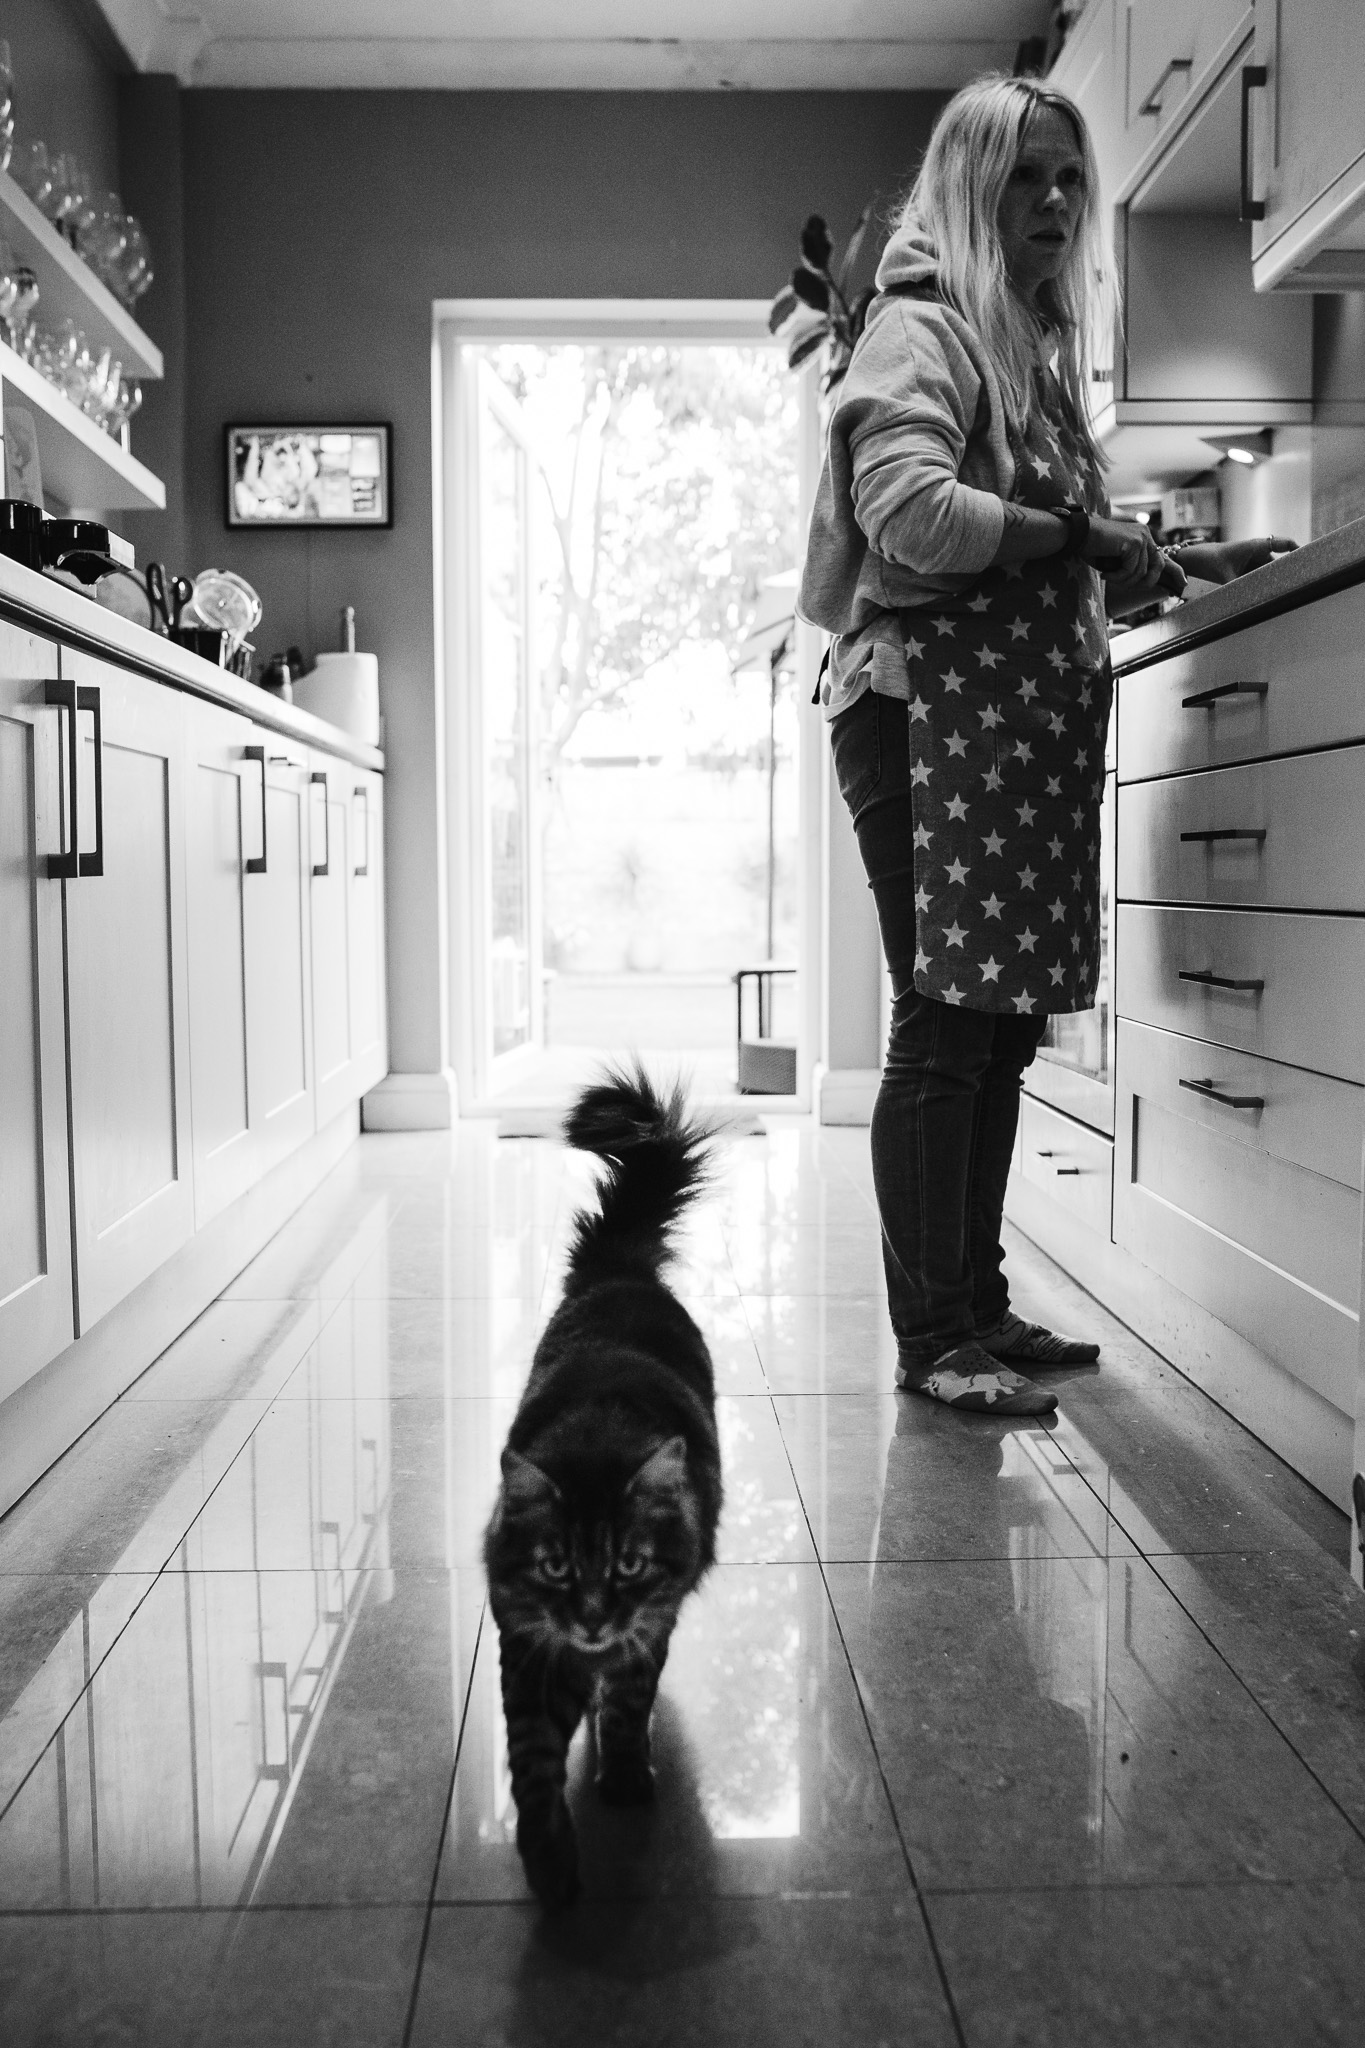 Mum is preparing food in a galley kitchen with a cat walking through during a family photo session.